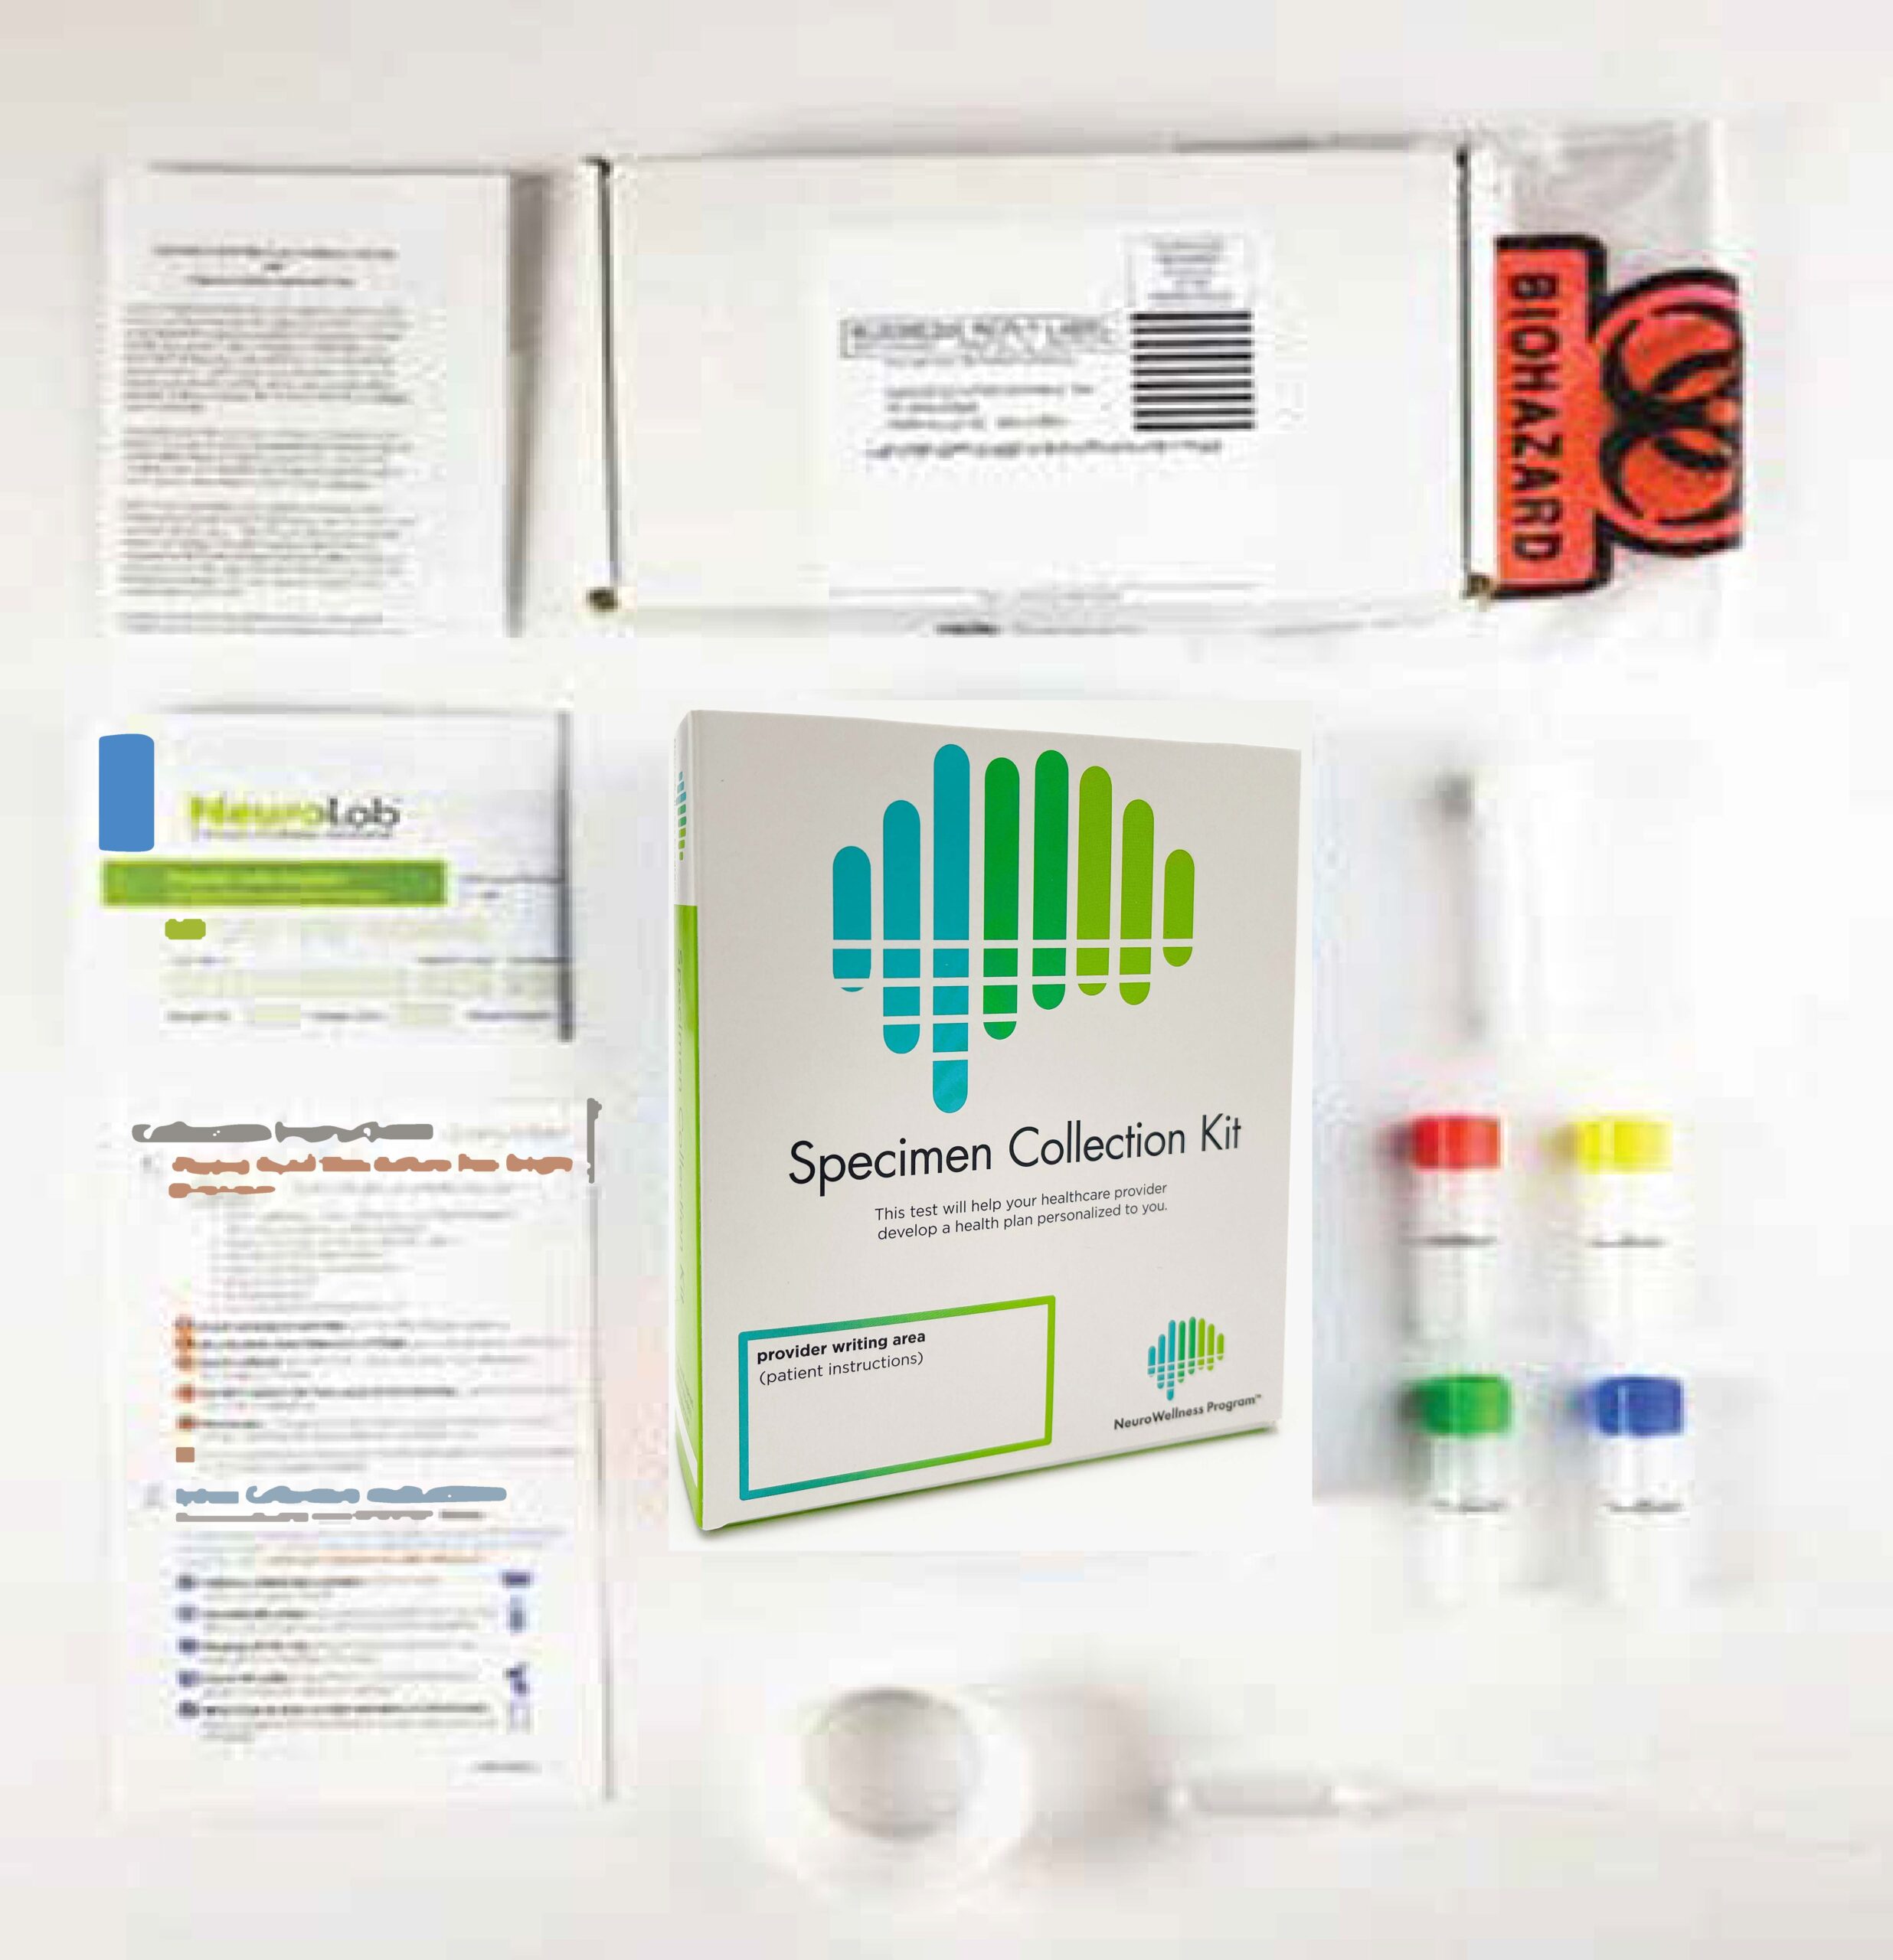 Components of the NeuroWellness Program specimen collection kit